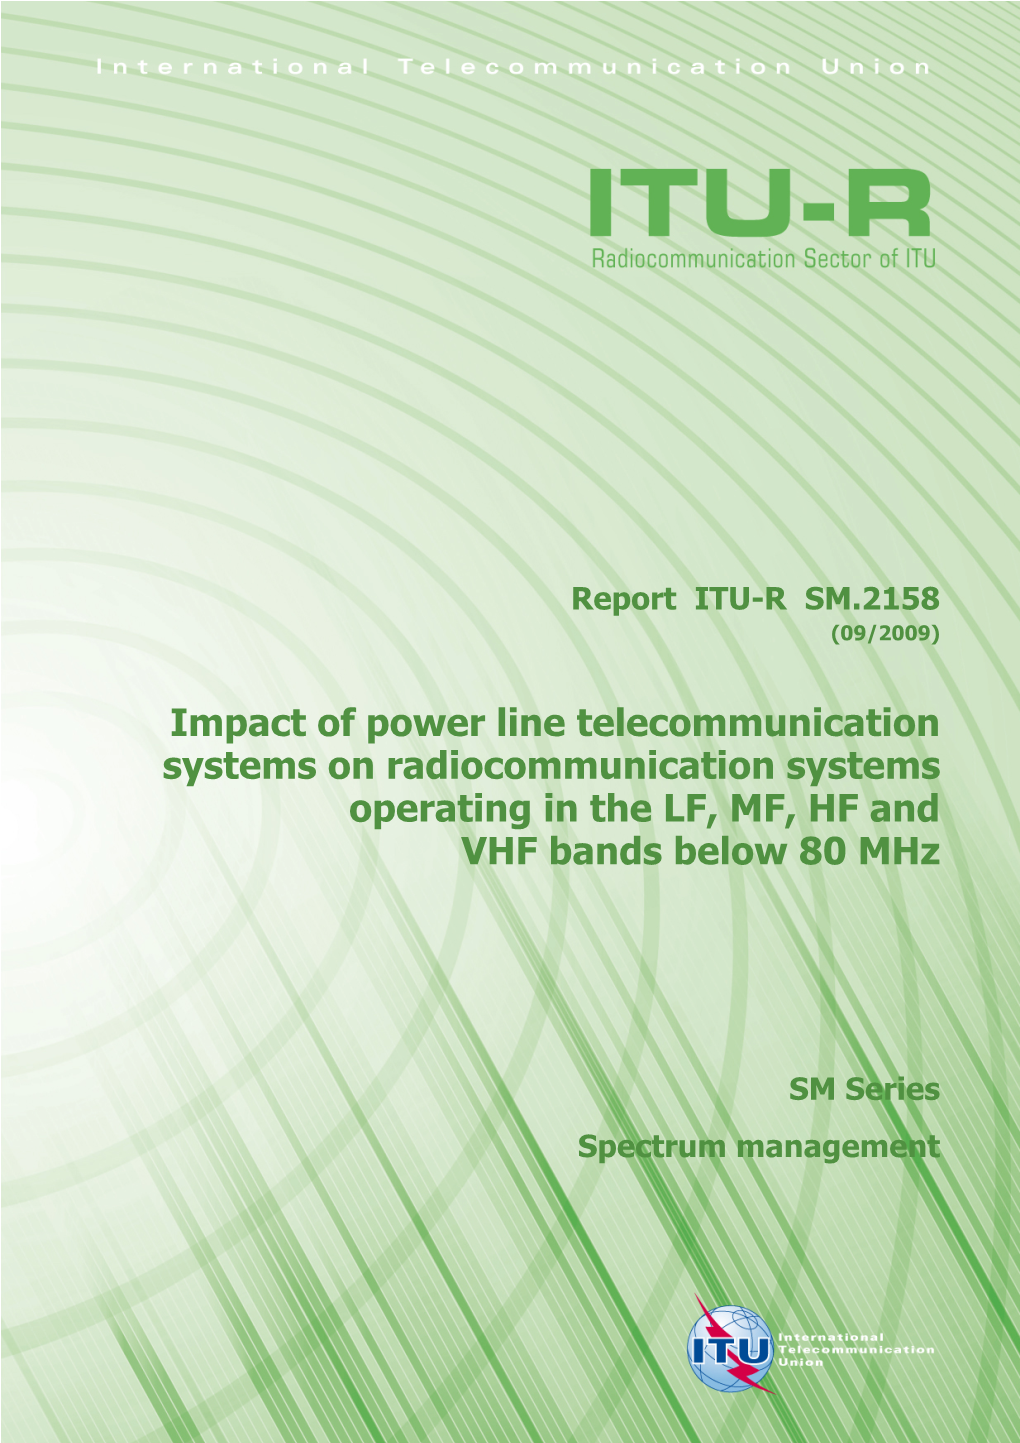 Impact of Power Line Telecommunication Systems on Radiocommunication Systems Operating in the LF, MF, HF and VHF Bands Below 80 Mhz